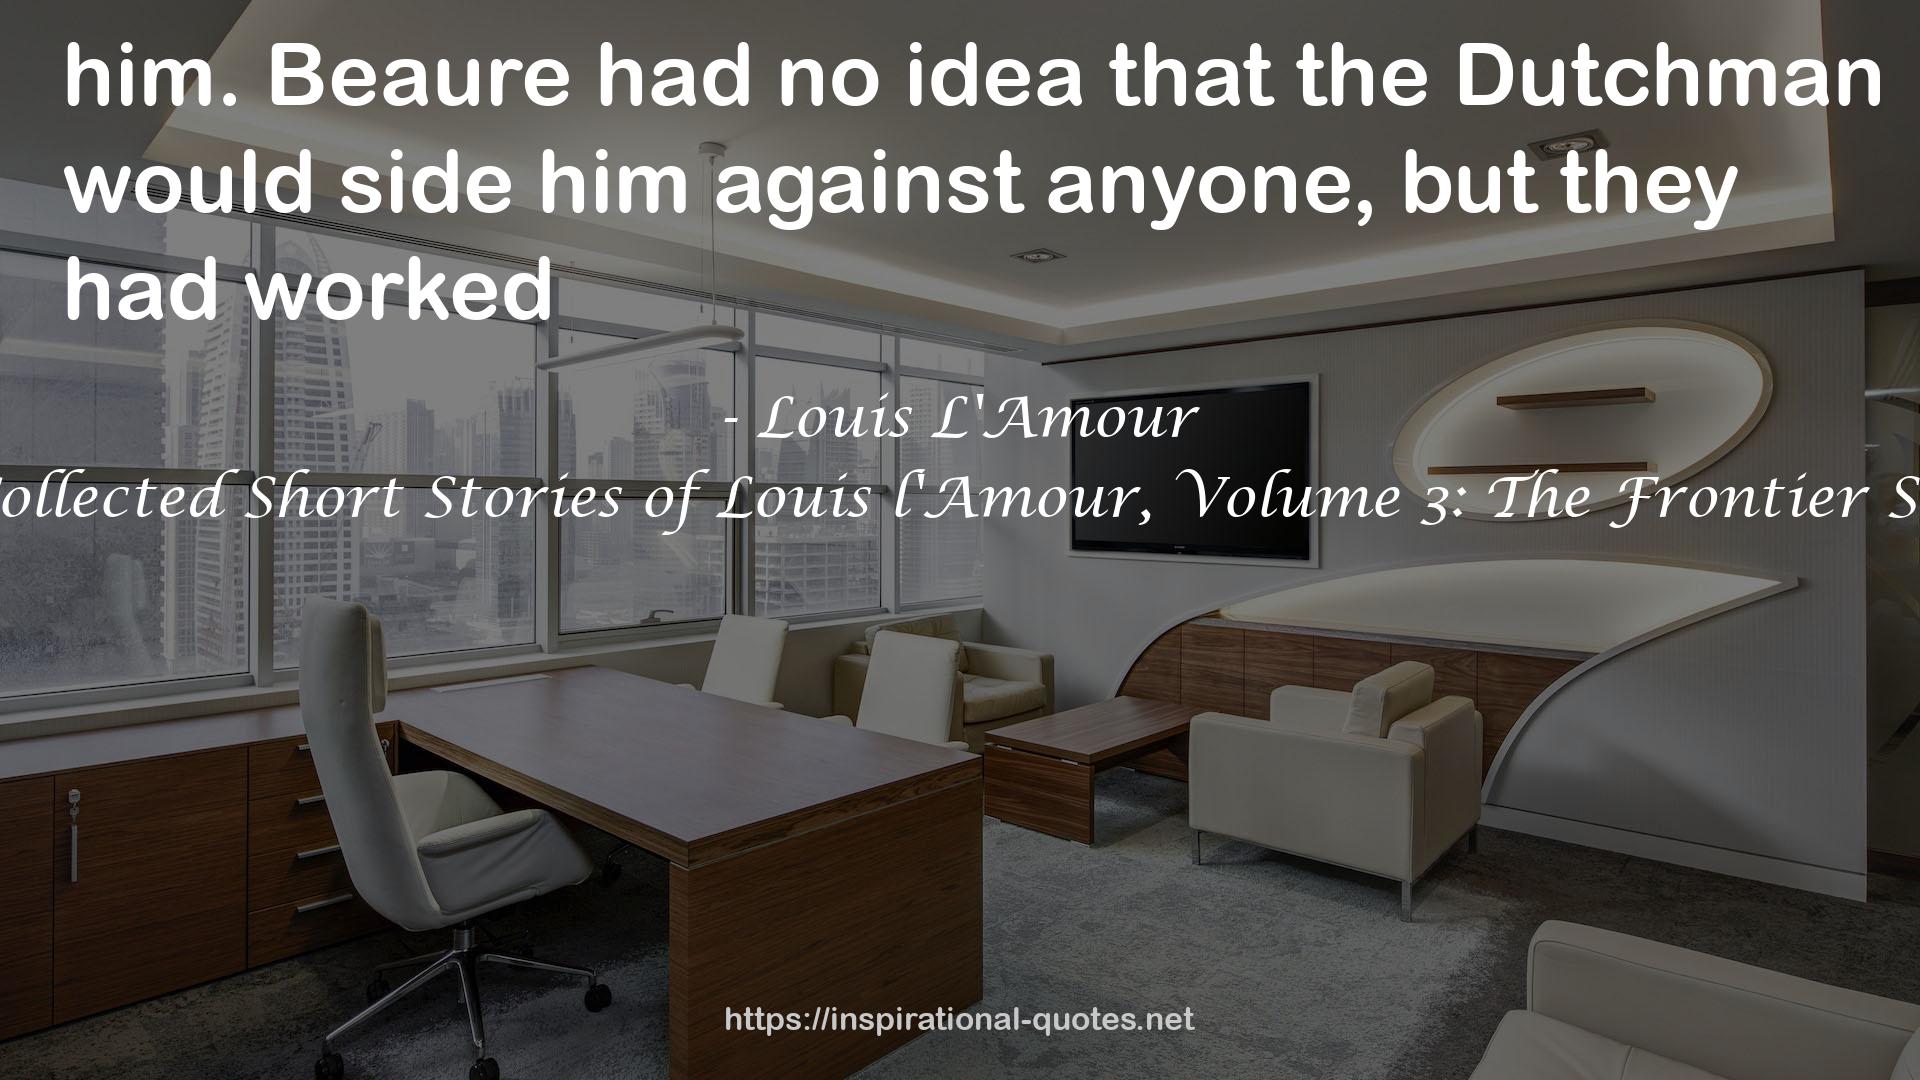 The Collected Short Stories of Louis l'Amour, Volume 3: The Frontier Stories QUOTES